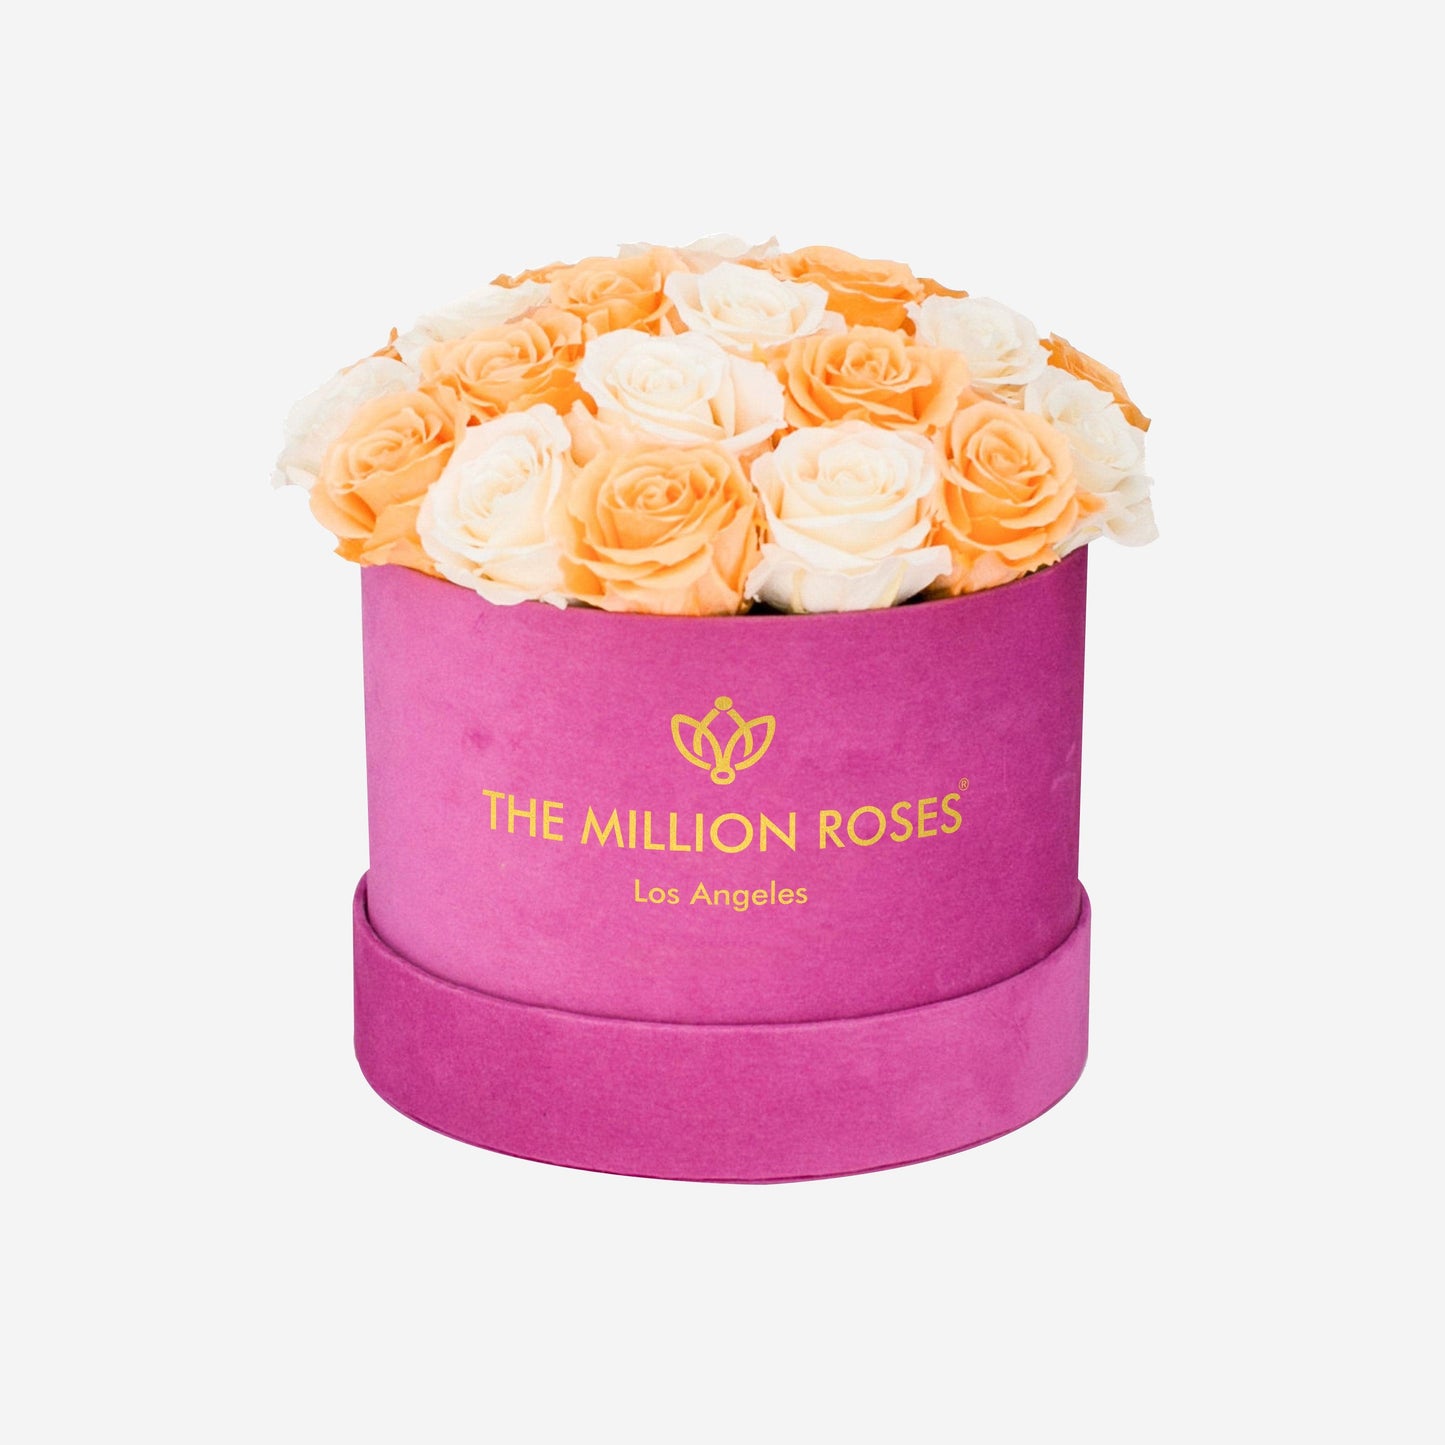 Classic Hot Pink Suede Dome Box | Peach & Ivory Roses - The Million Roses